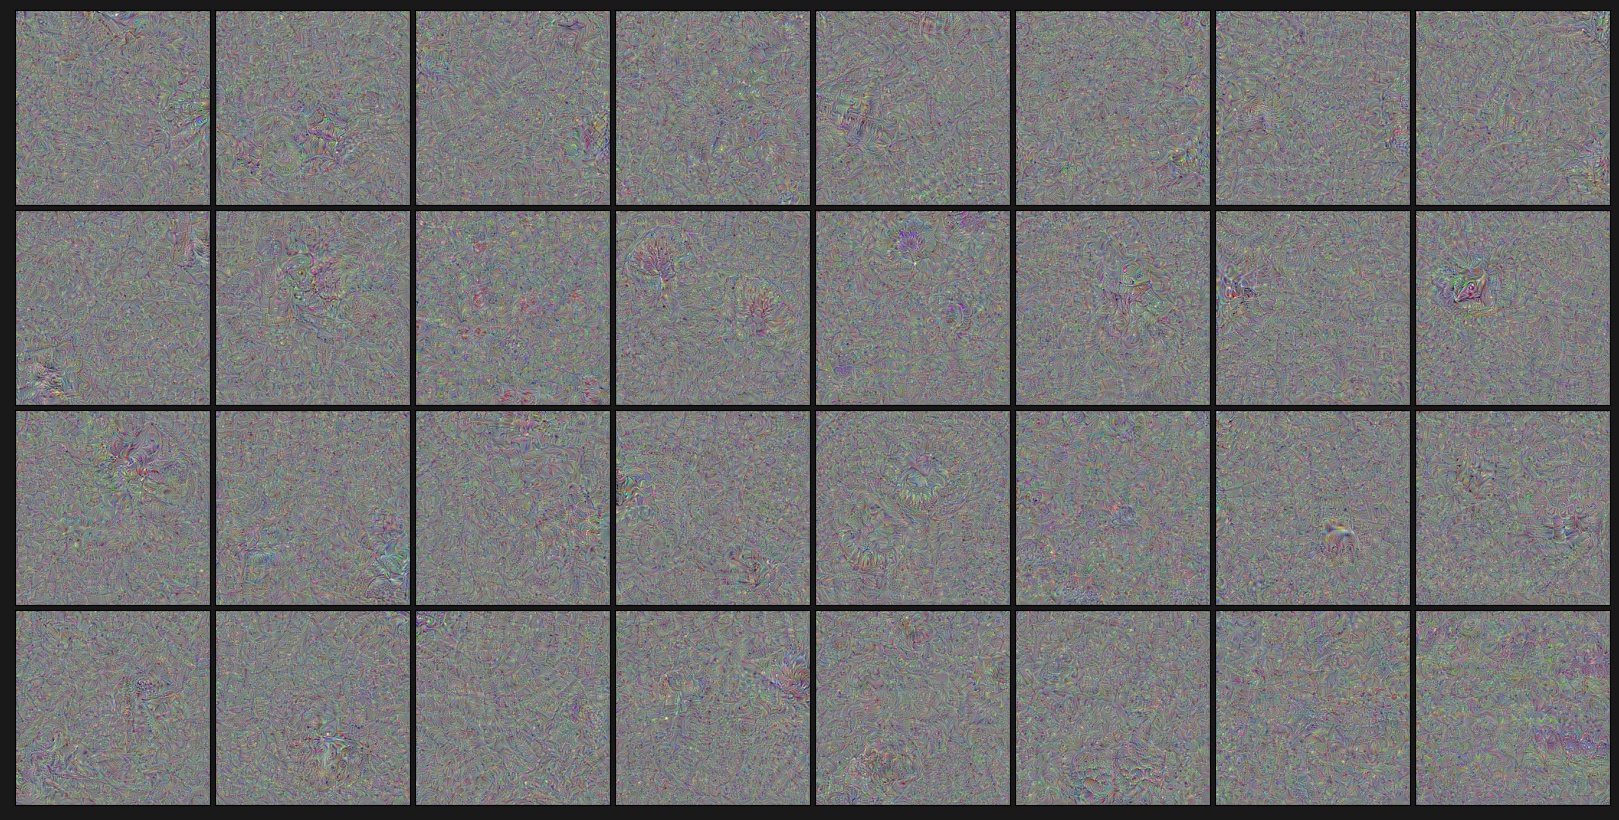 Filter visualization of the last layer of a ResNet 101